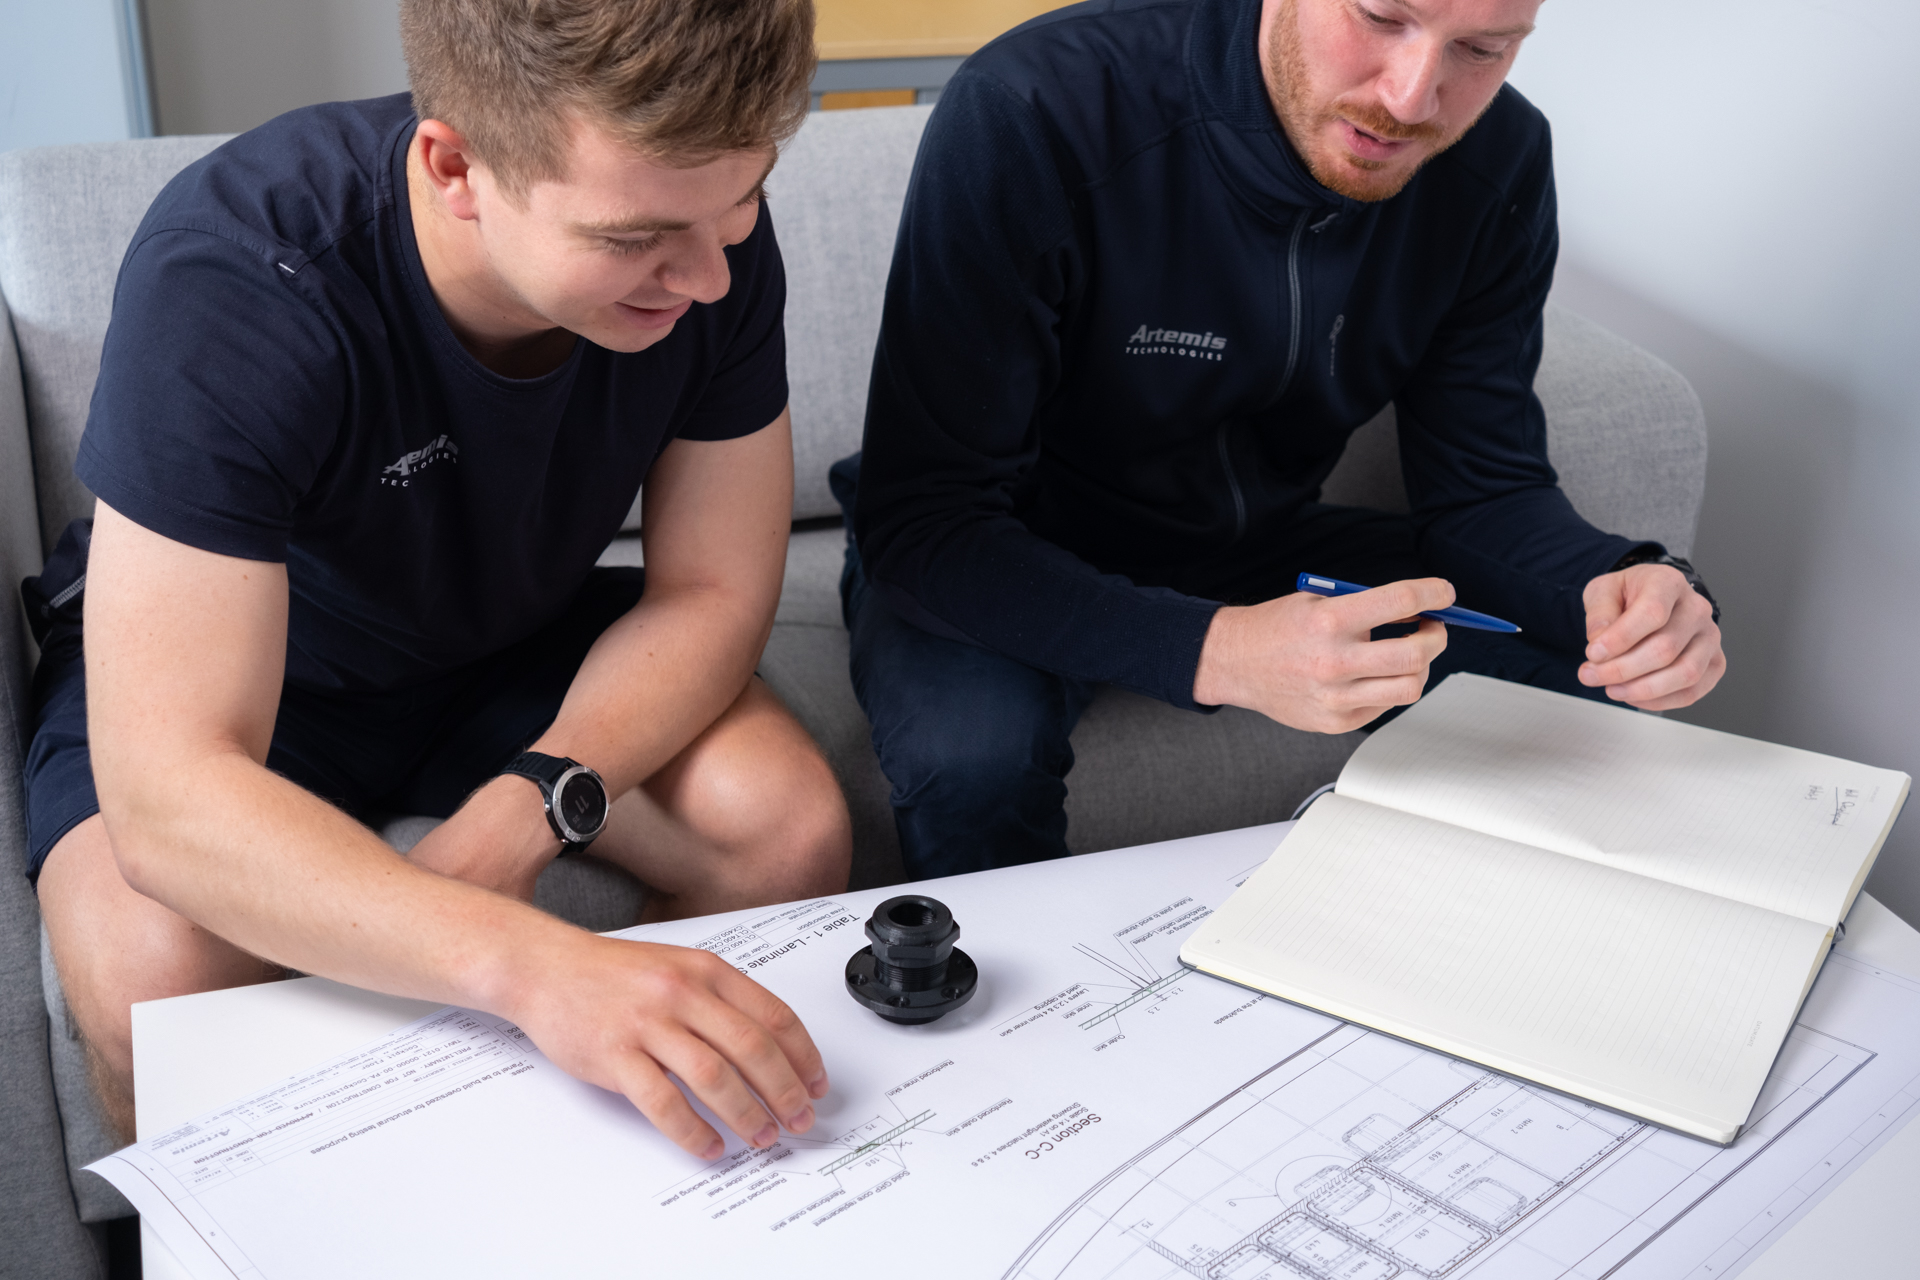 Two men looking at technical drawings